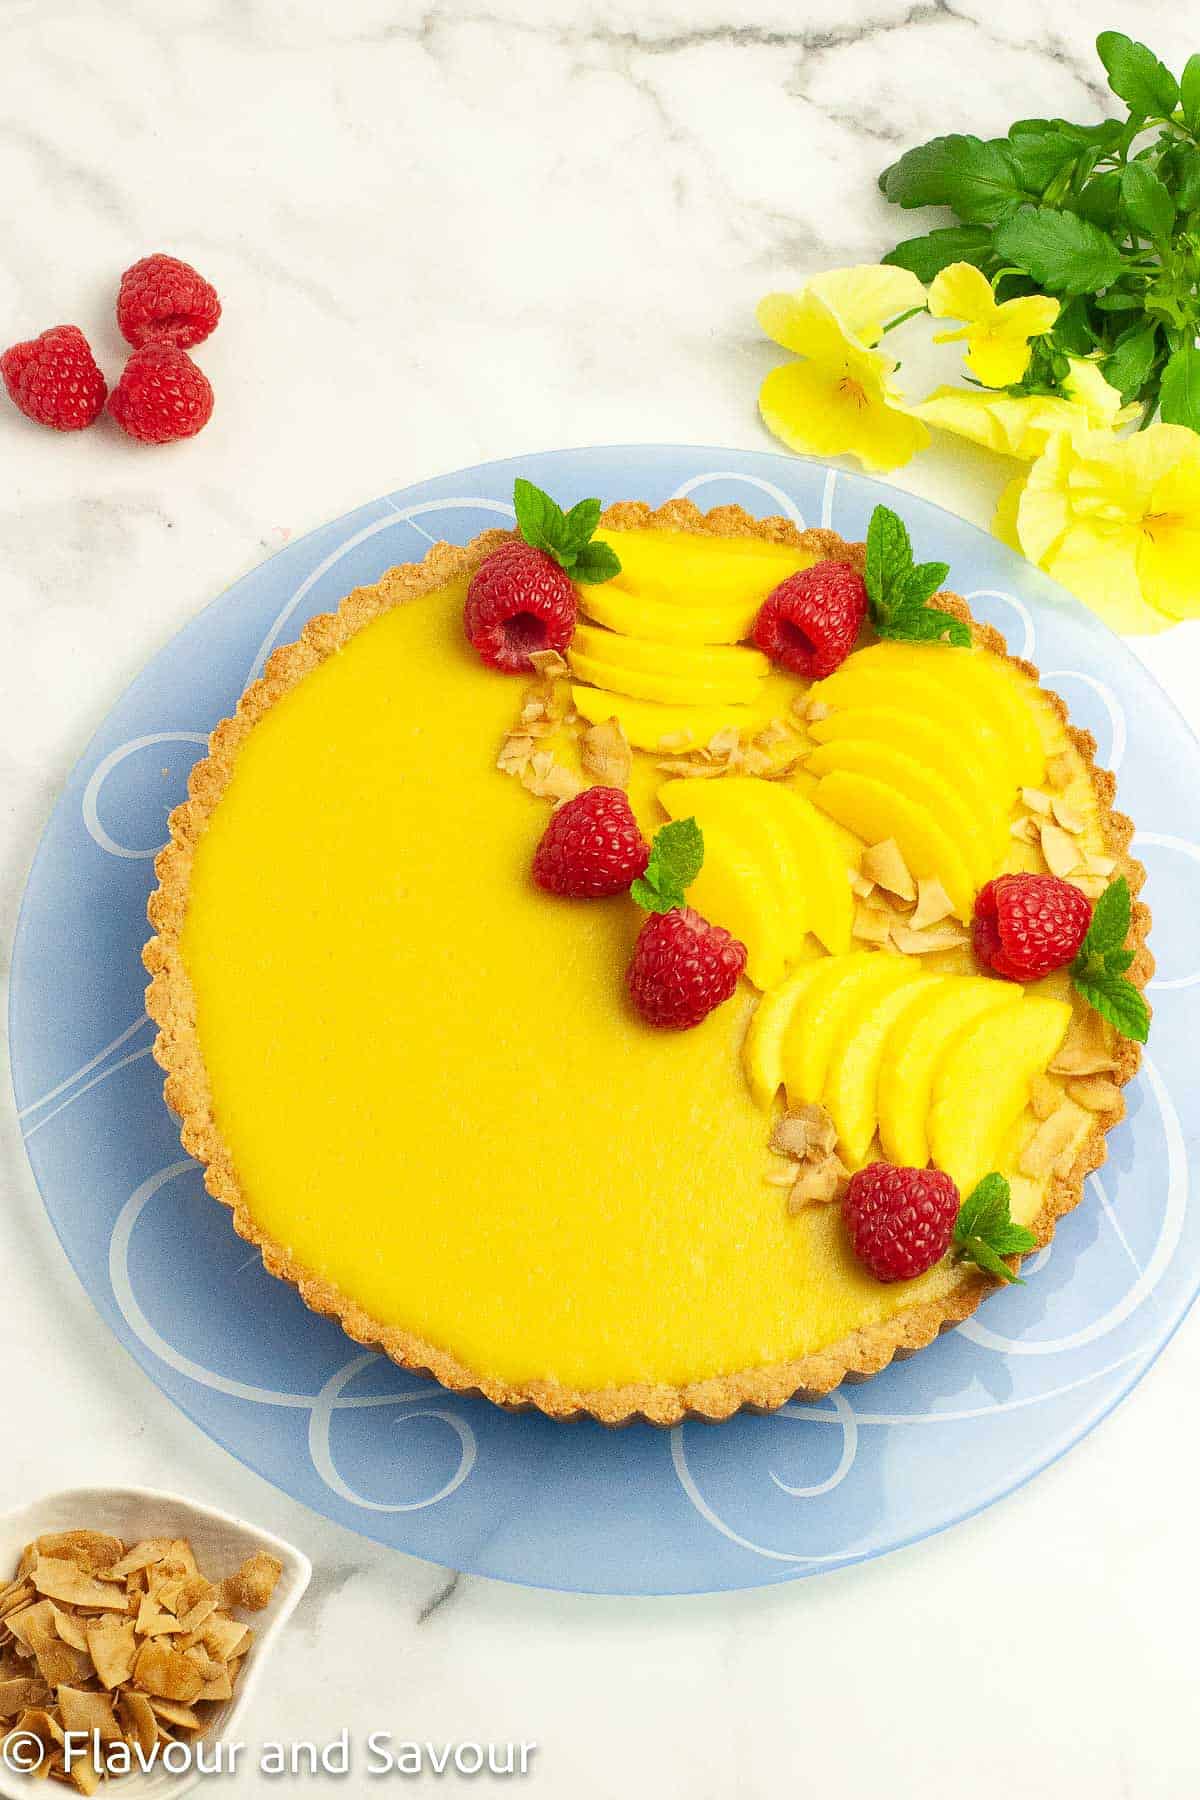 Overhead view of a gluten-free mango tart garnished with sliced mango, raspberries, and coconut chips.